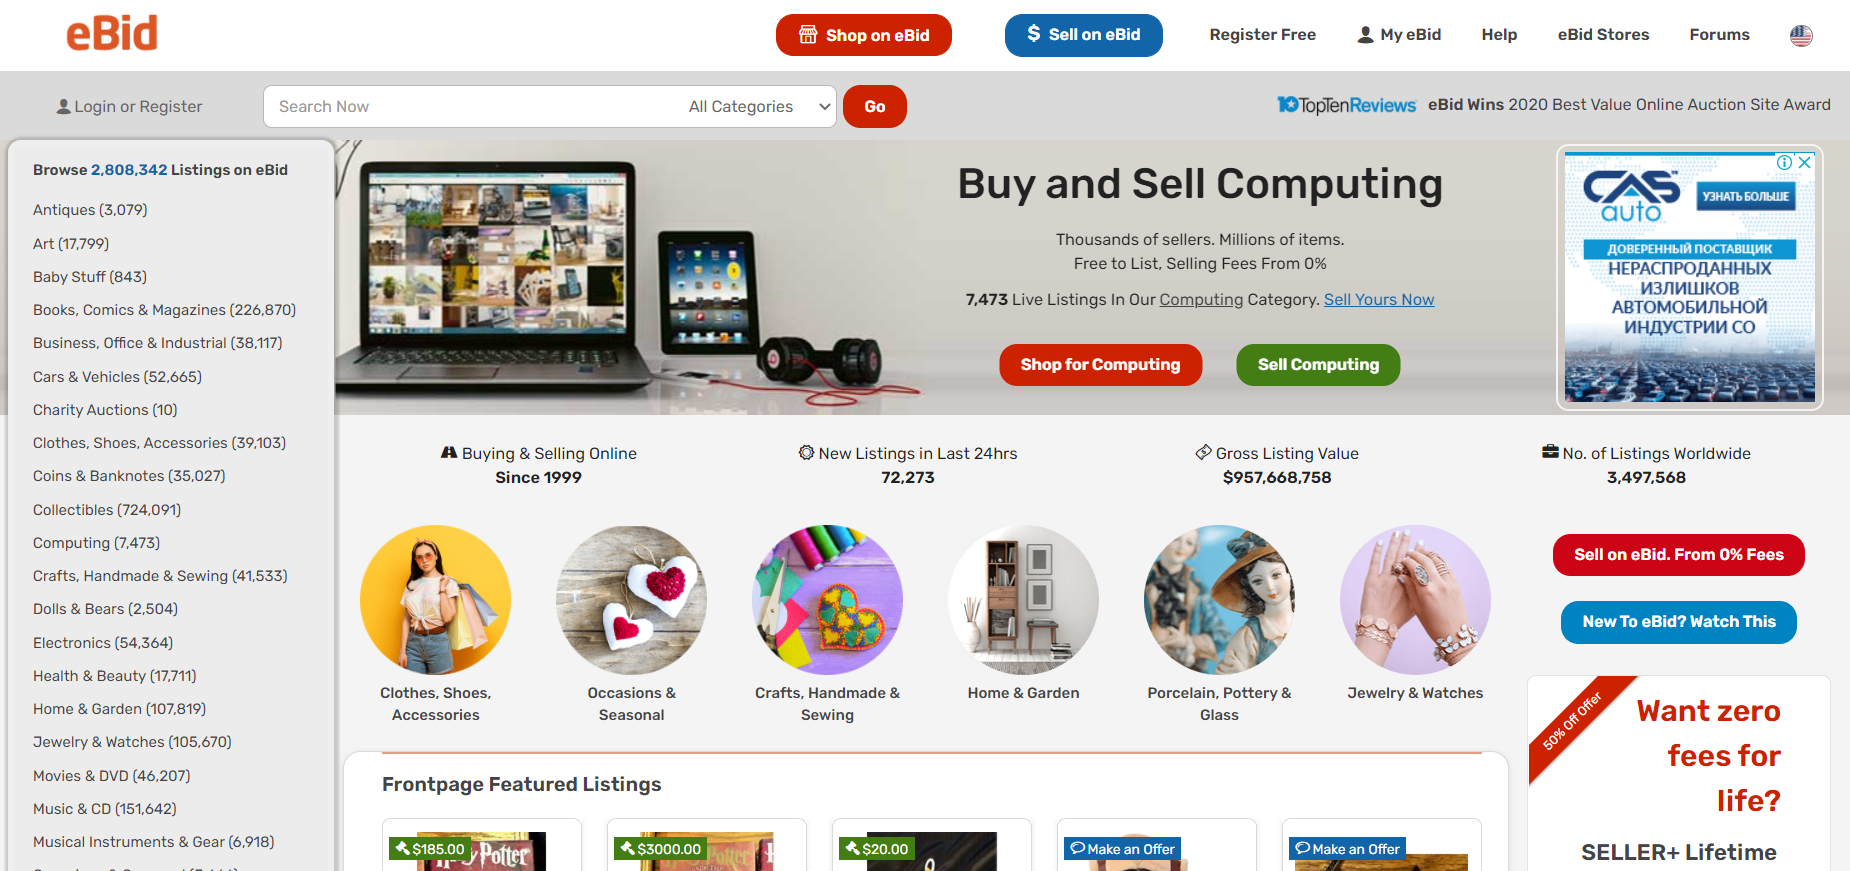 eBid is one of the best sites like eBay